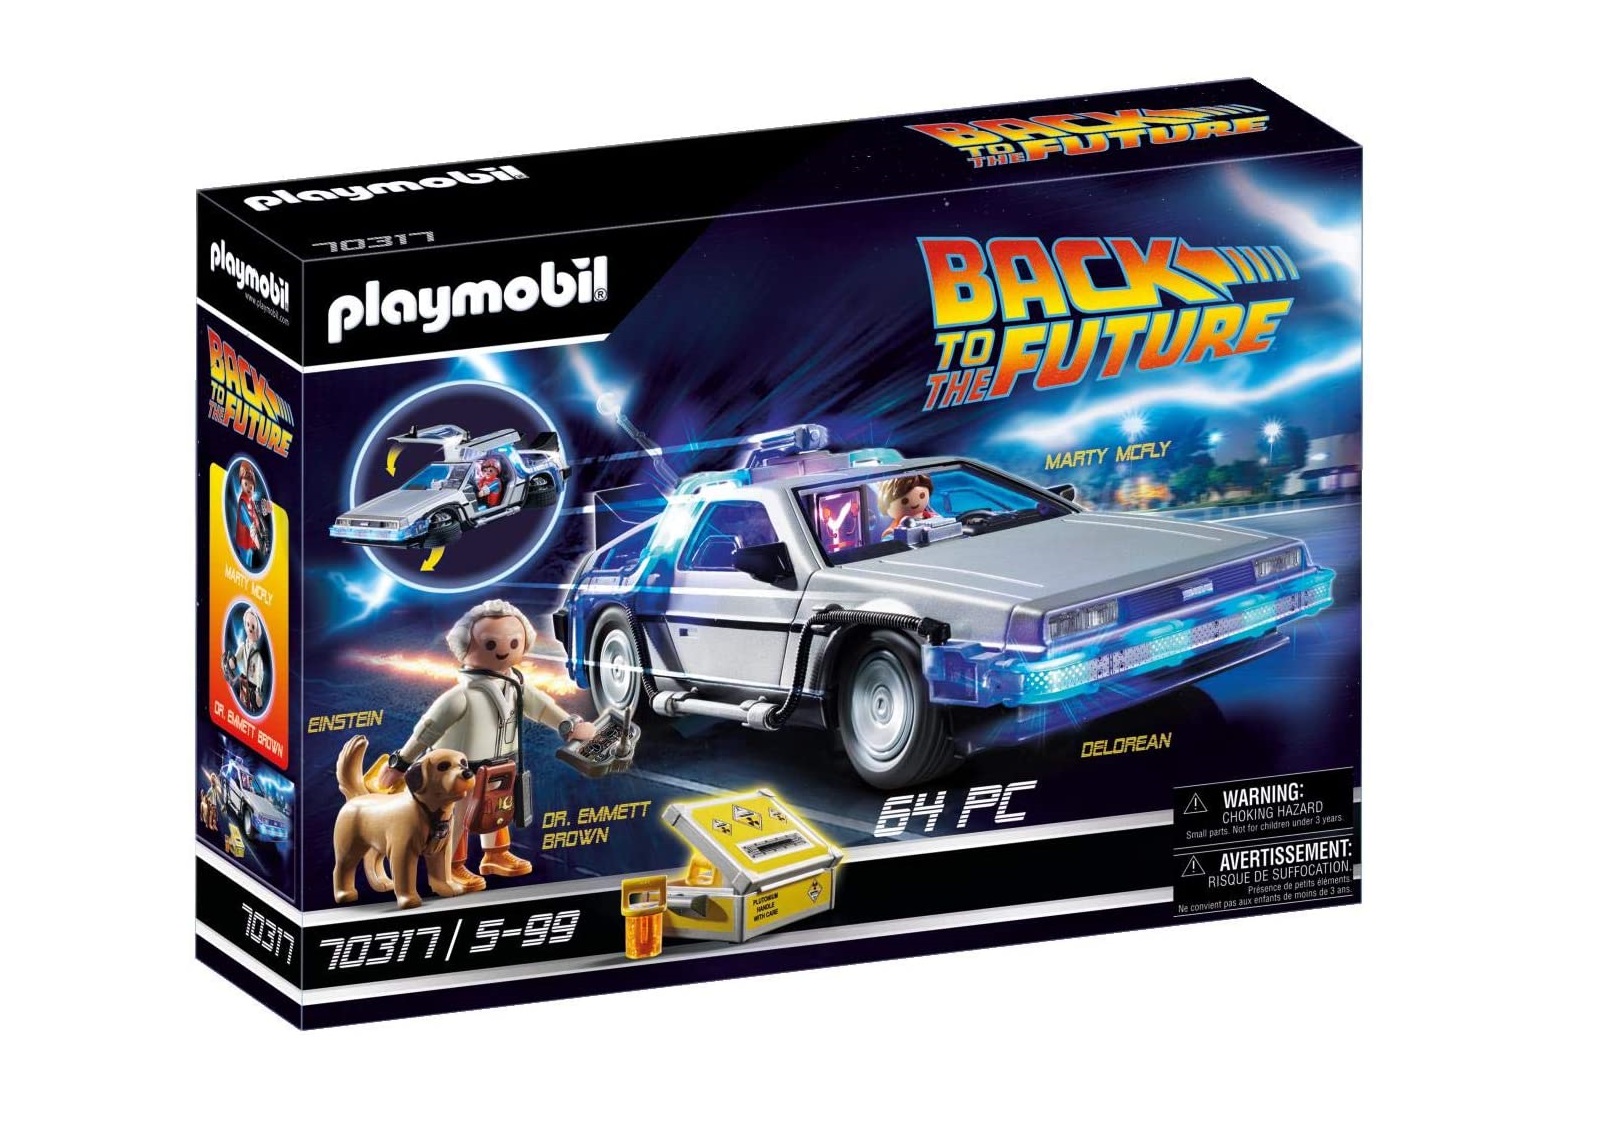 Playmobil from 'Back to the Future'.